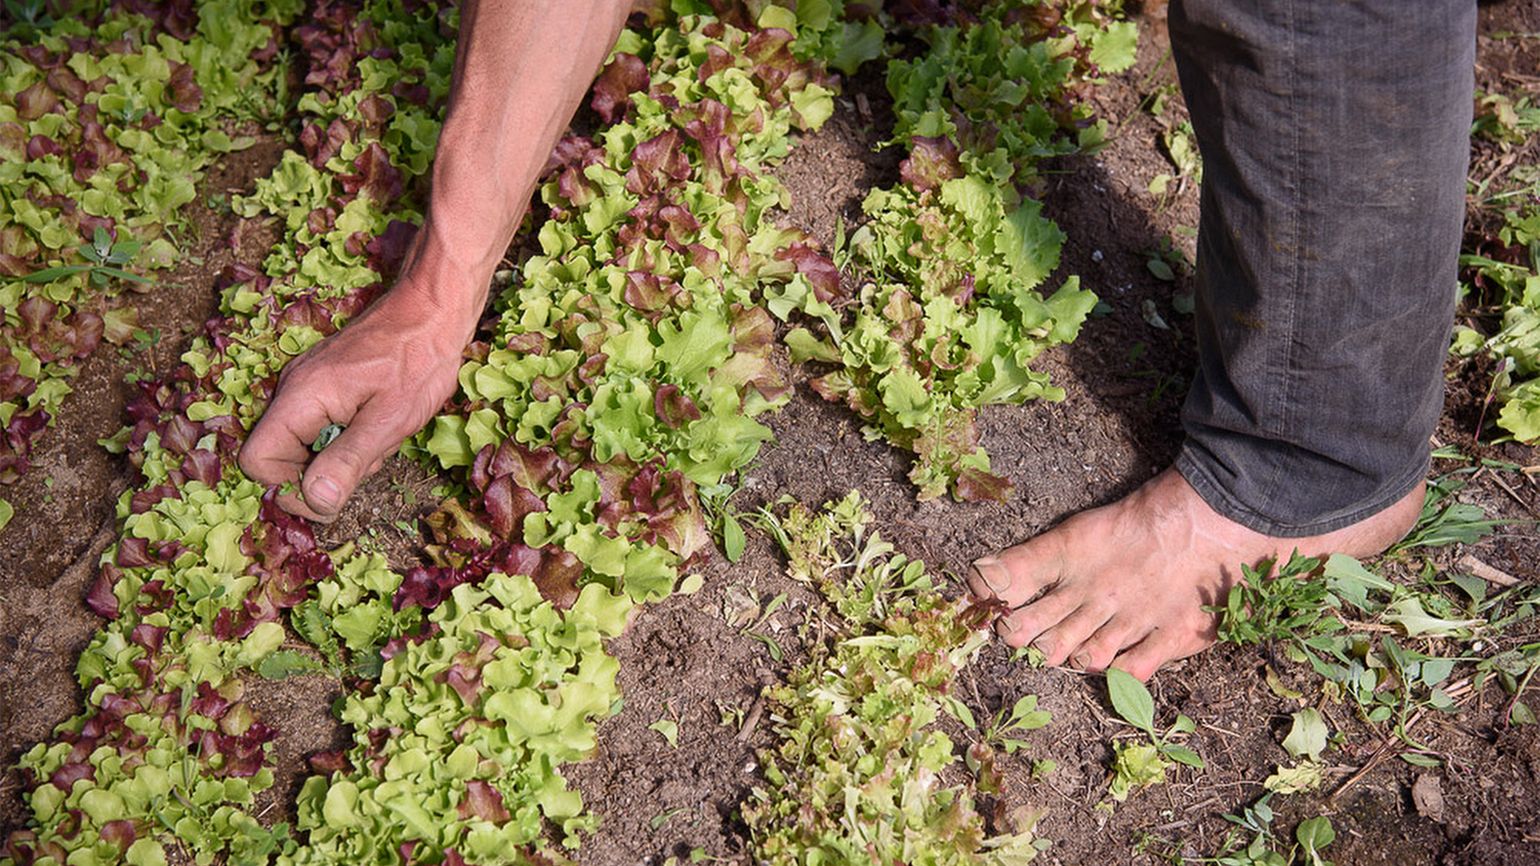 Michael leans down to weed the planted rows of lettuce on his farm